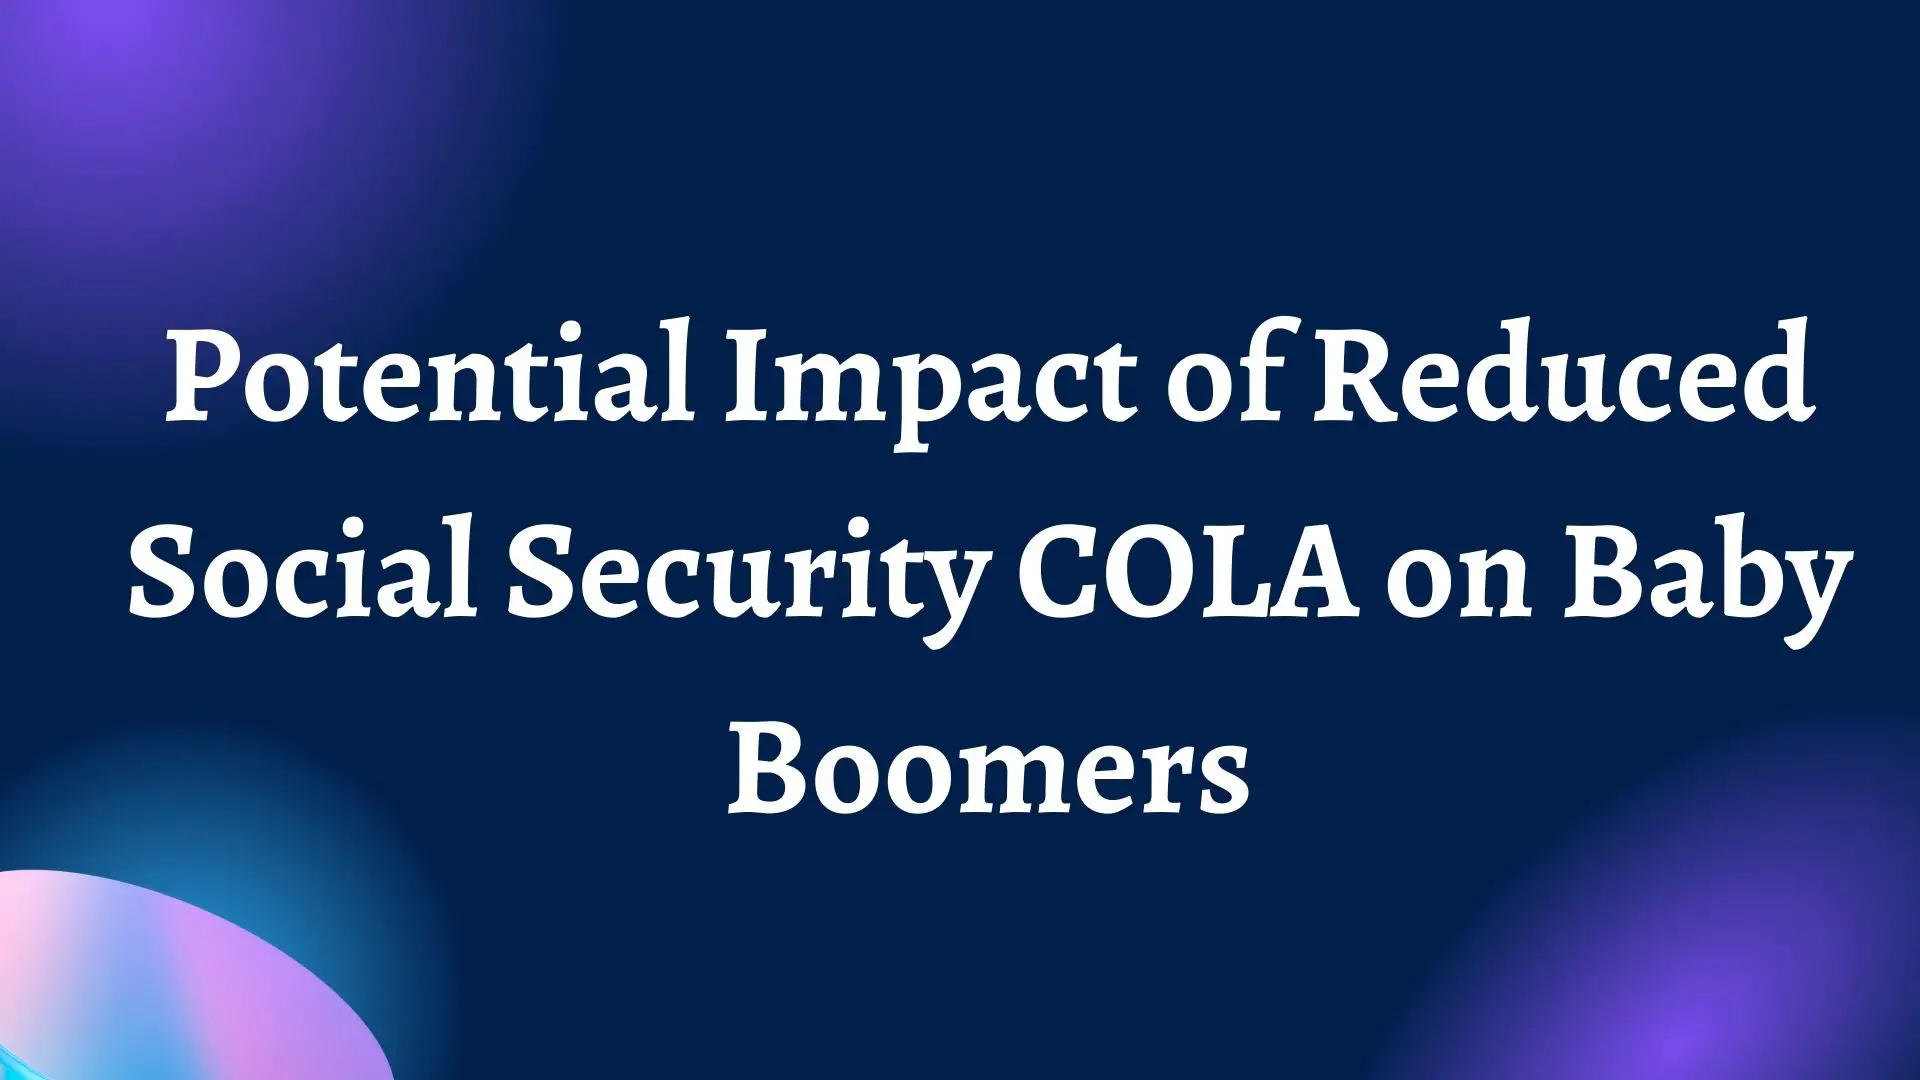 Potential Impact of Reduced Social Security COLA on Baby Boomers